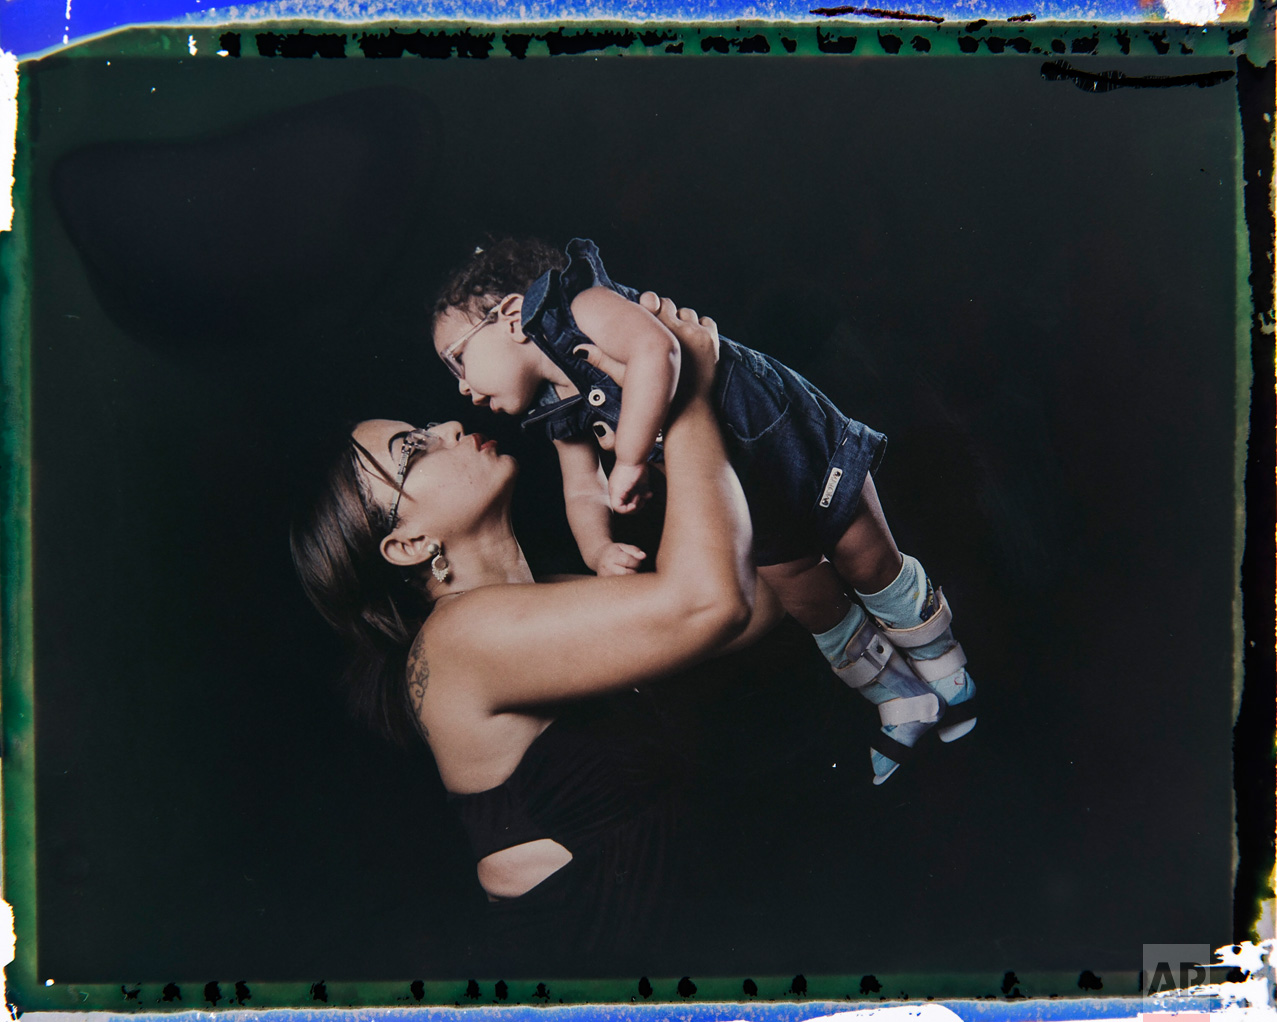  In this Sept. 29, 2016 photo made from a negative recovered from instant film, Rosana Alves holds her daughter Luana, who was born with microcephaly, one of many serious medical problems that can be caused by congenital Zika syndrome, as they pose f